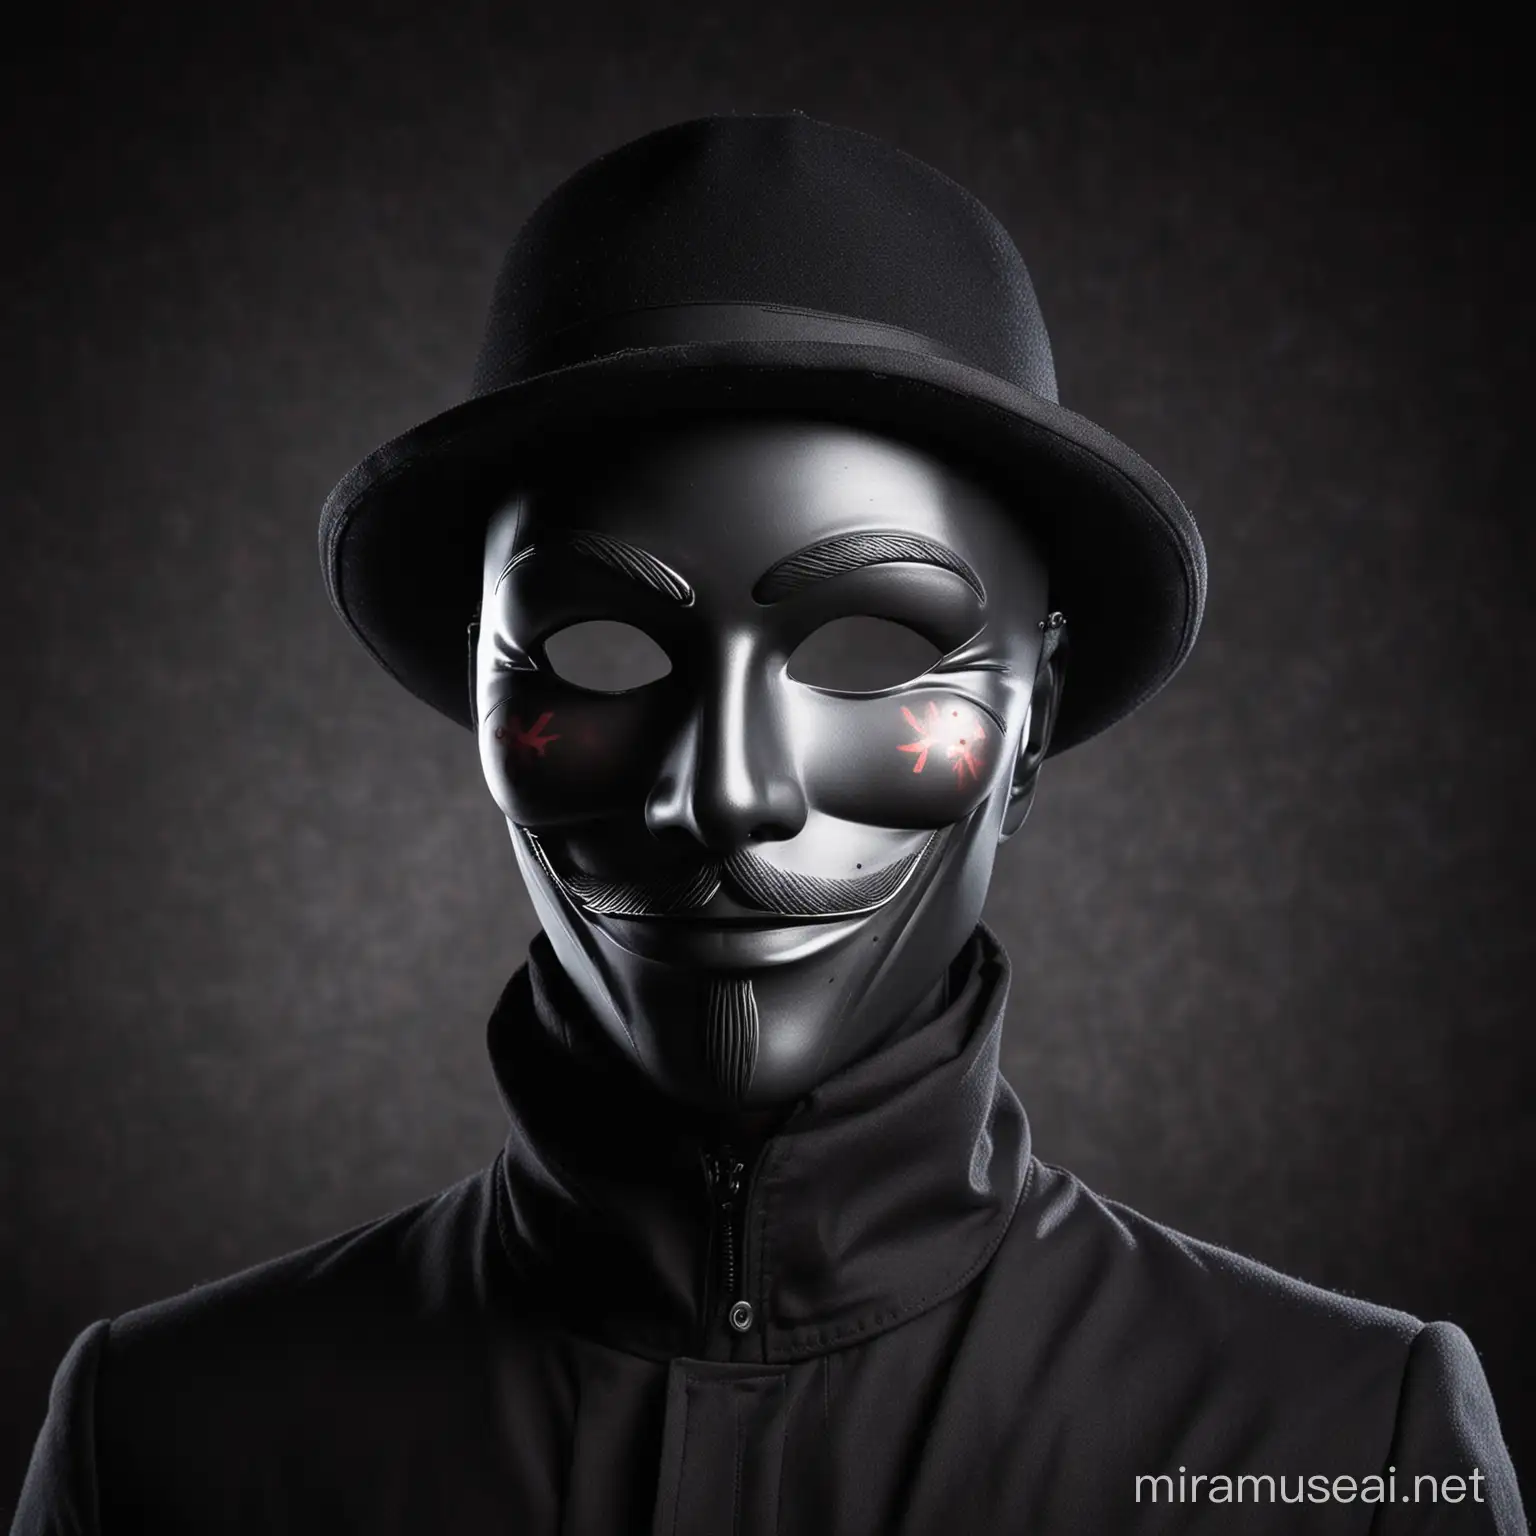 black mannequin wearing guy fawkes mask with hacker background